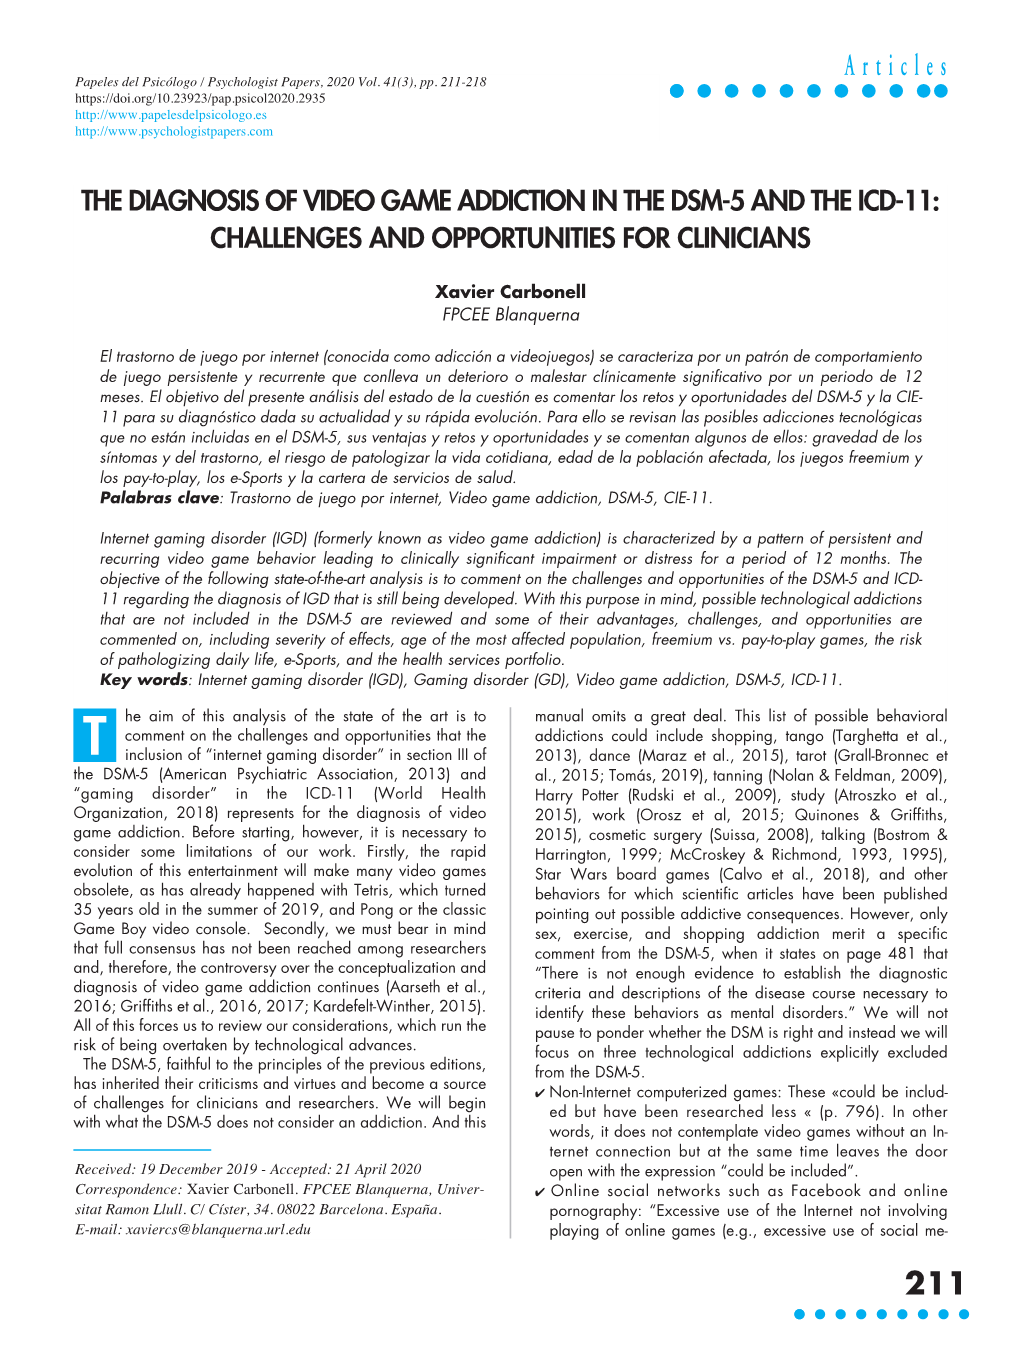 The Diagnosis of Video Game Addiction in the Dsm-5 and the Icd-11: Challenges and Opportunities for Clinicians